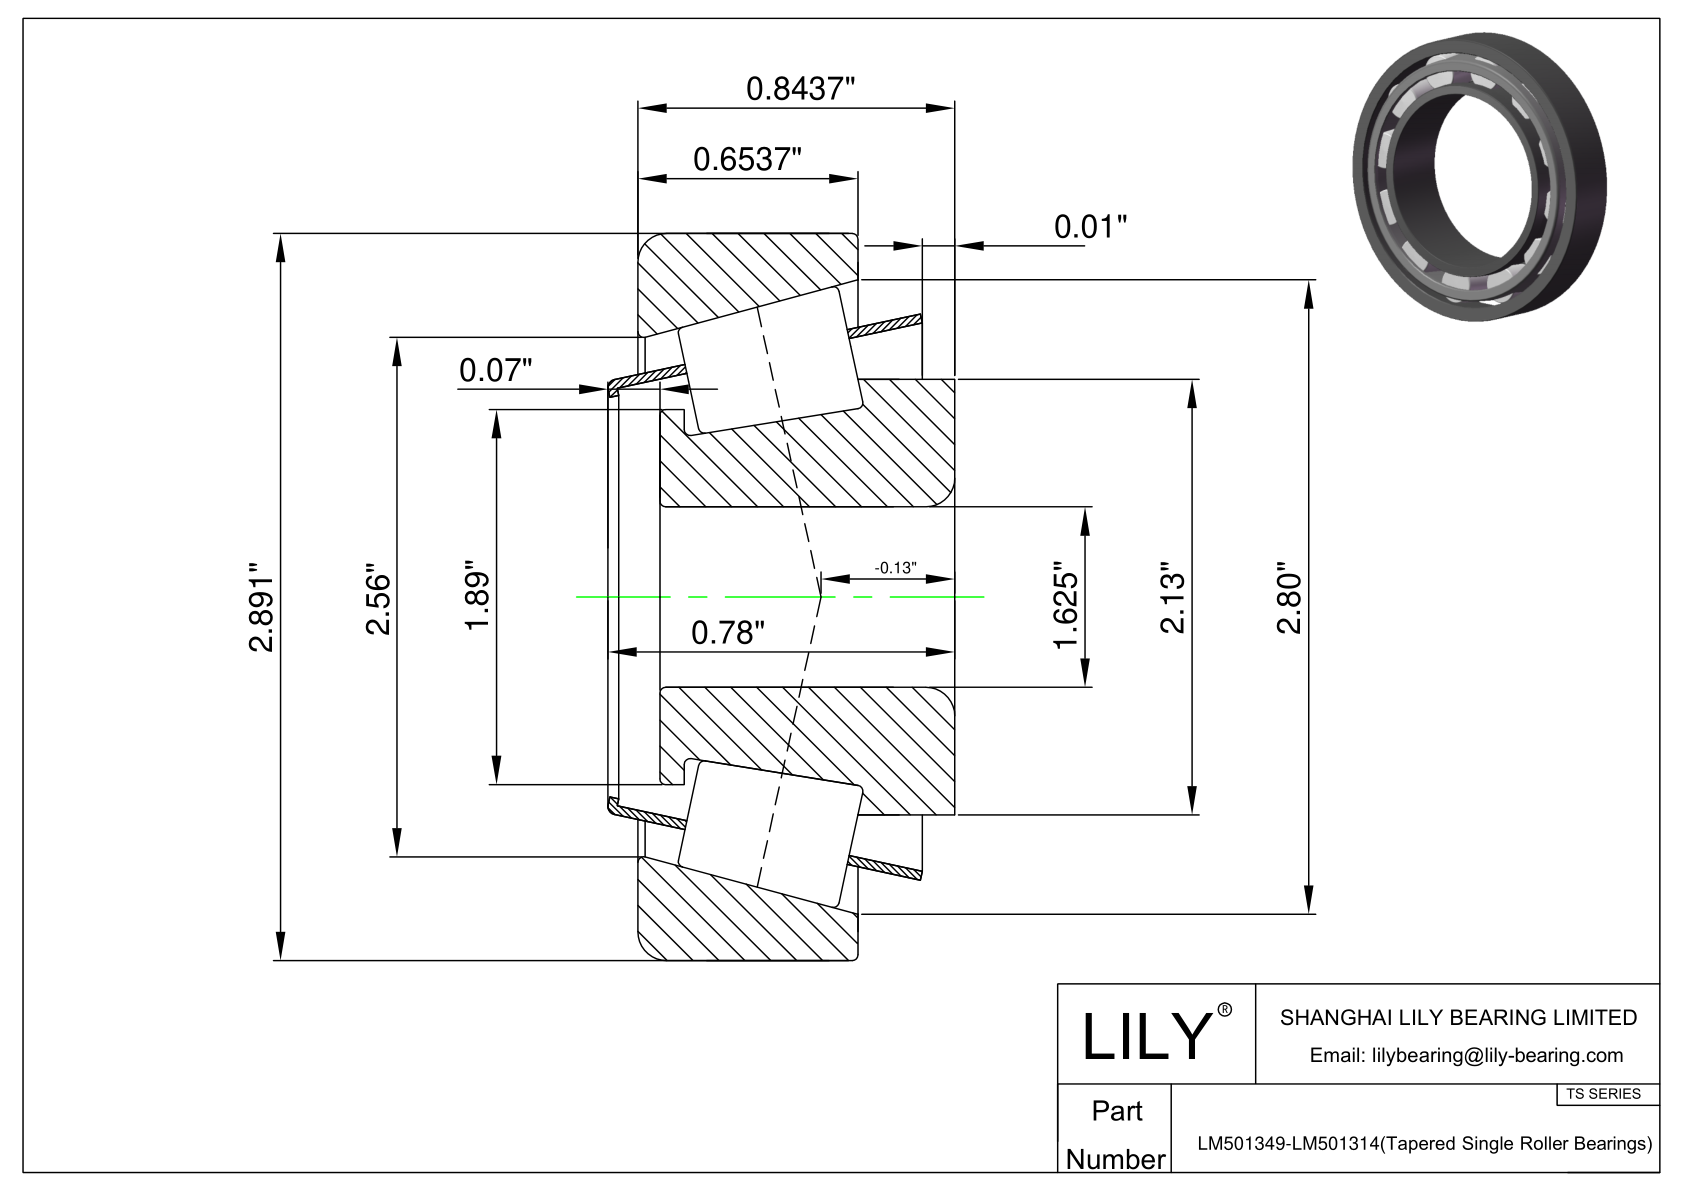 LM501349-LM501314 TS (Tapered Single Roller Bearings) (Imperial) cad drawing